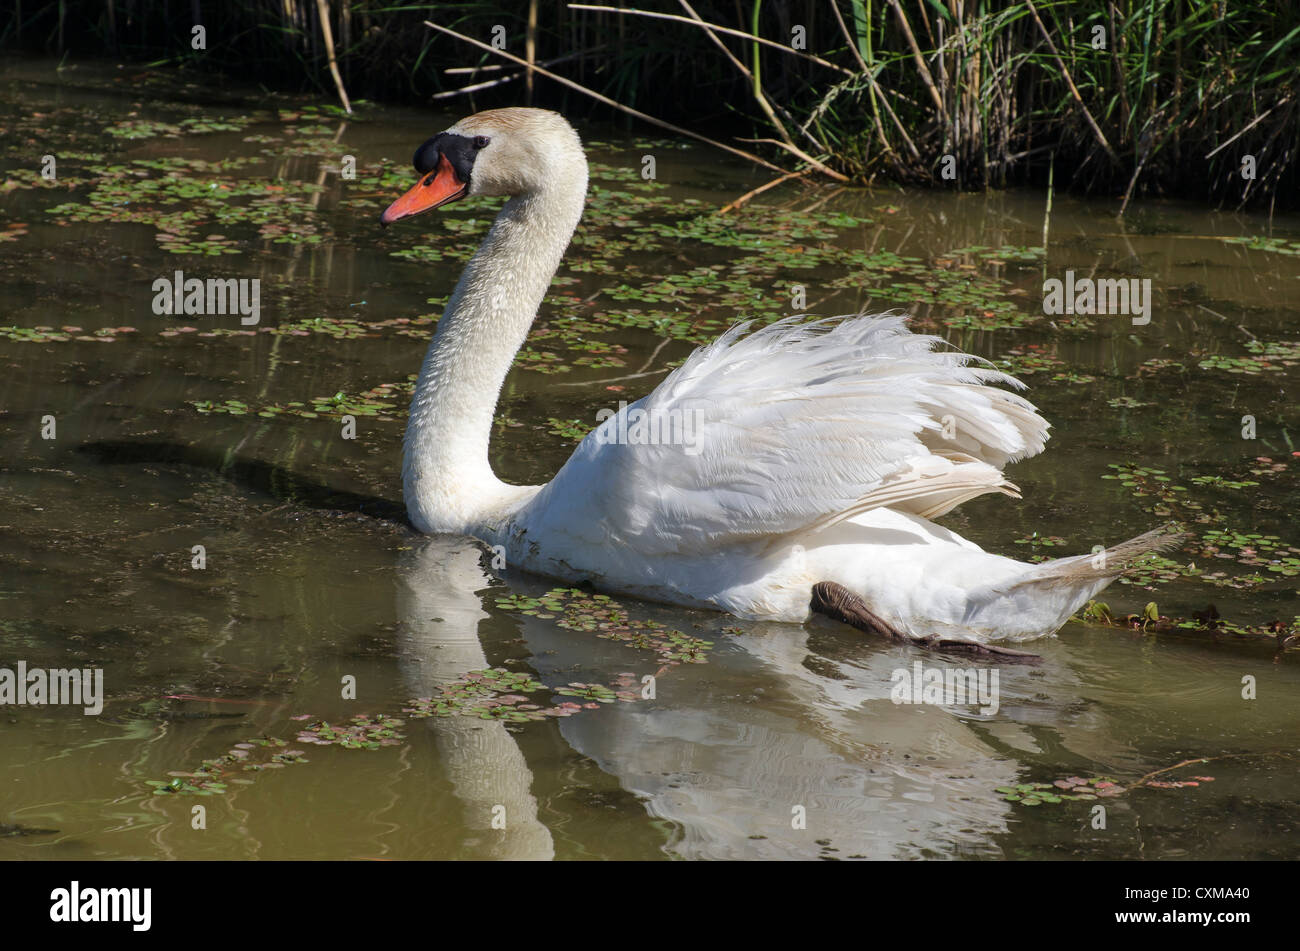 A swan swimming on water Stock Photo